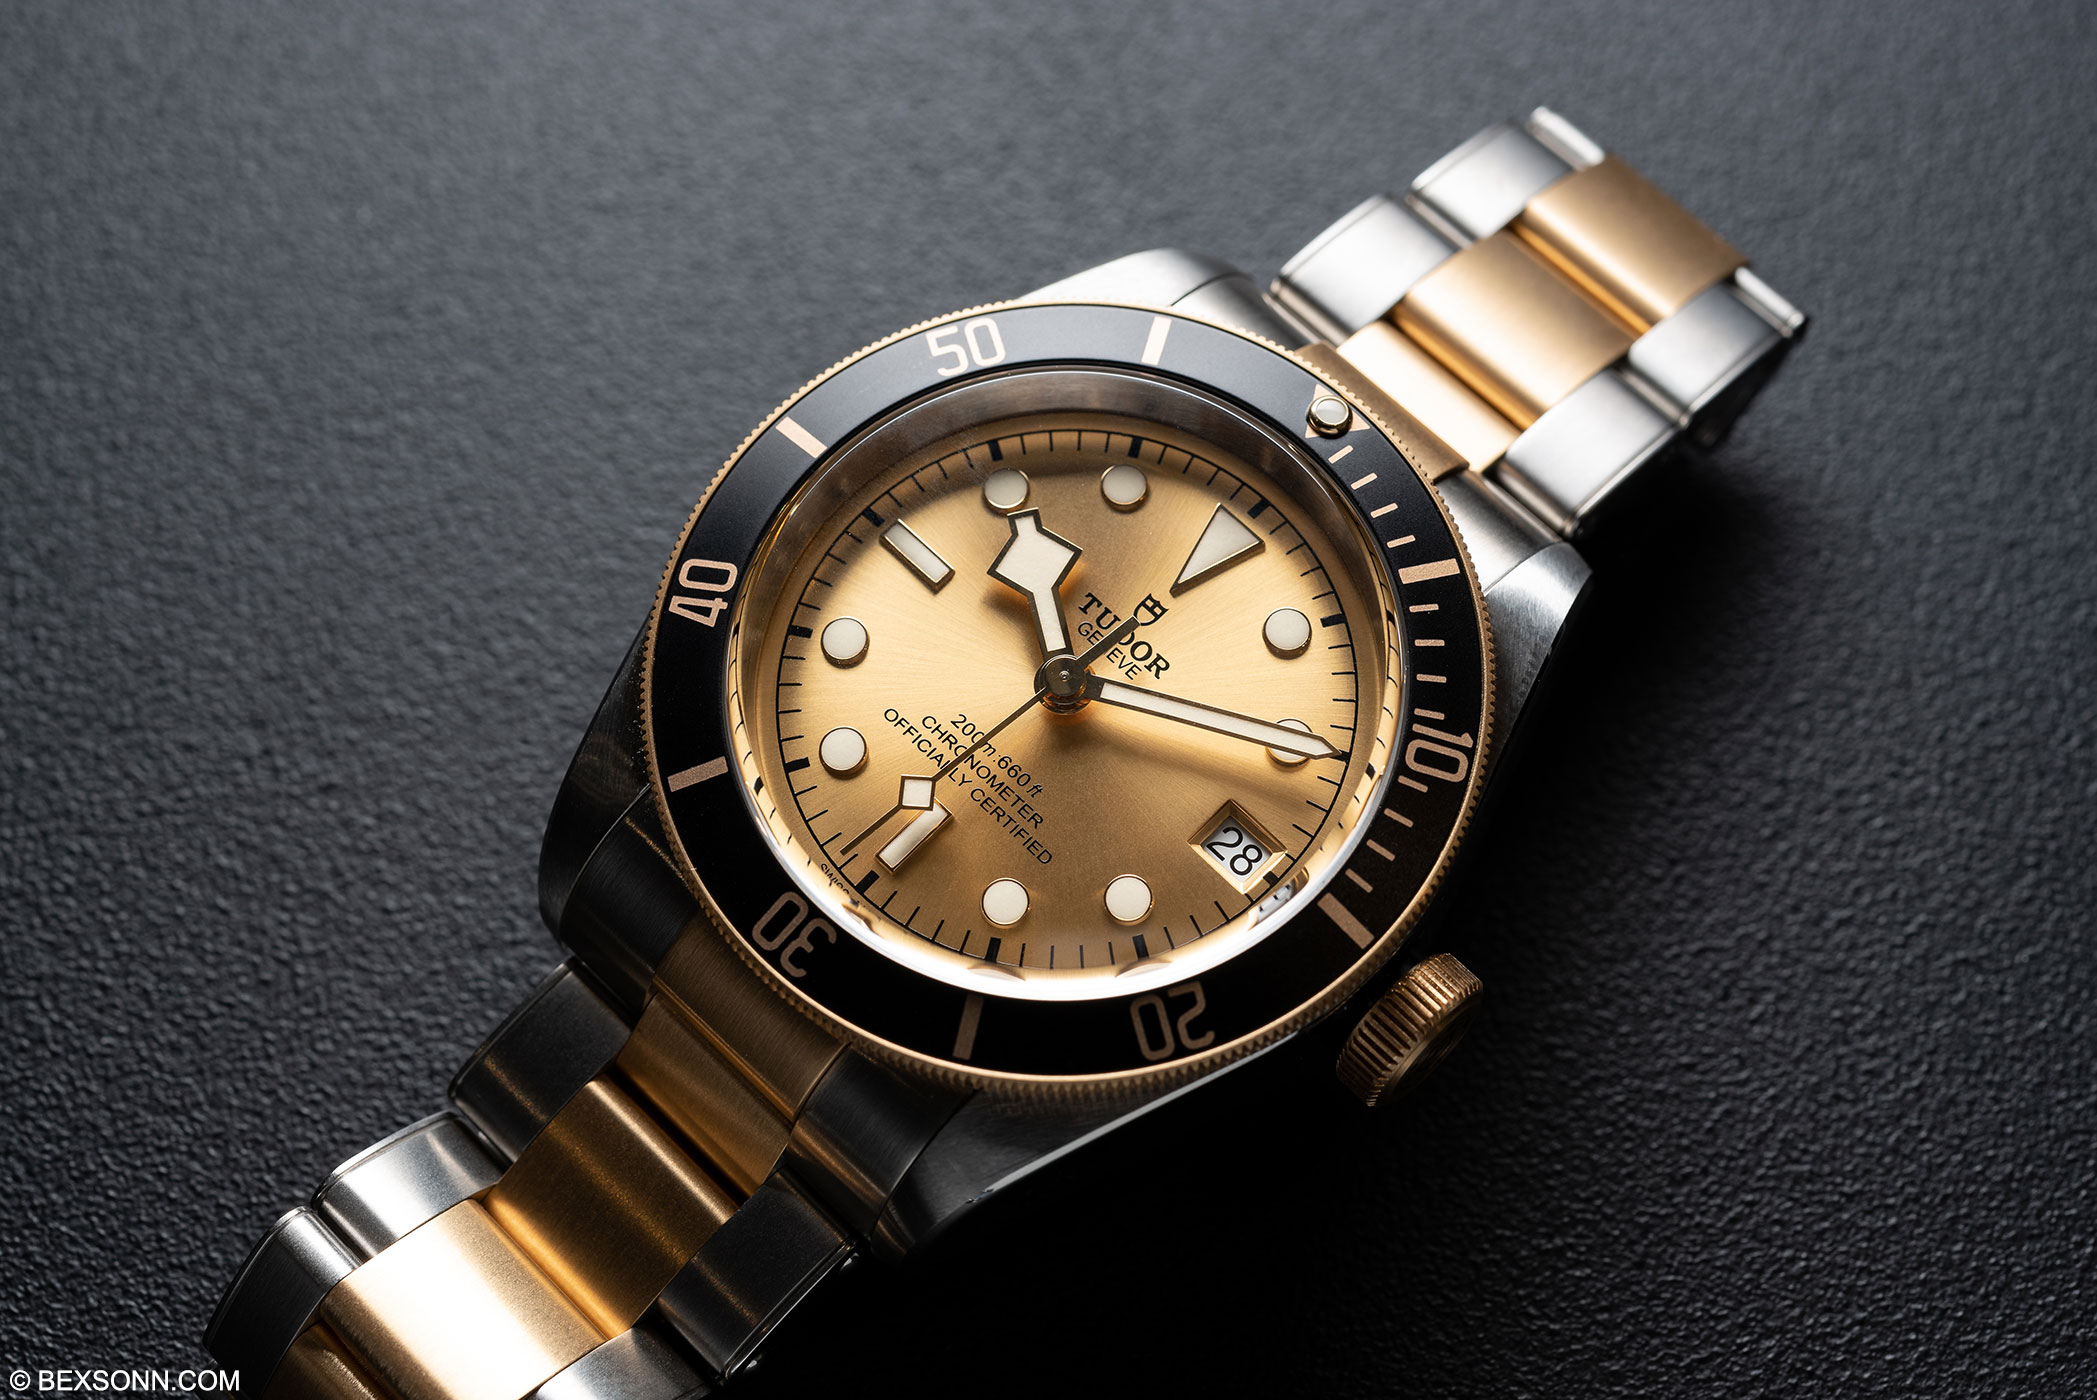 The Tudor Heritage Black Bay Steel Gold With Champagne Dial Bexsonn